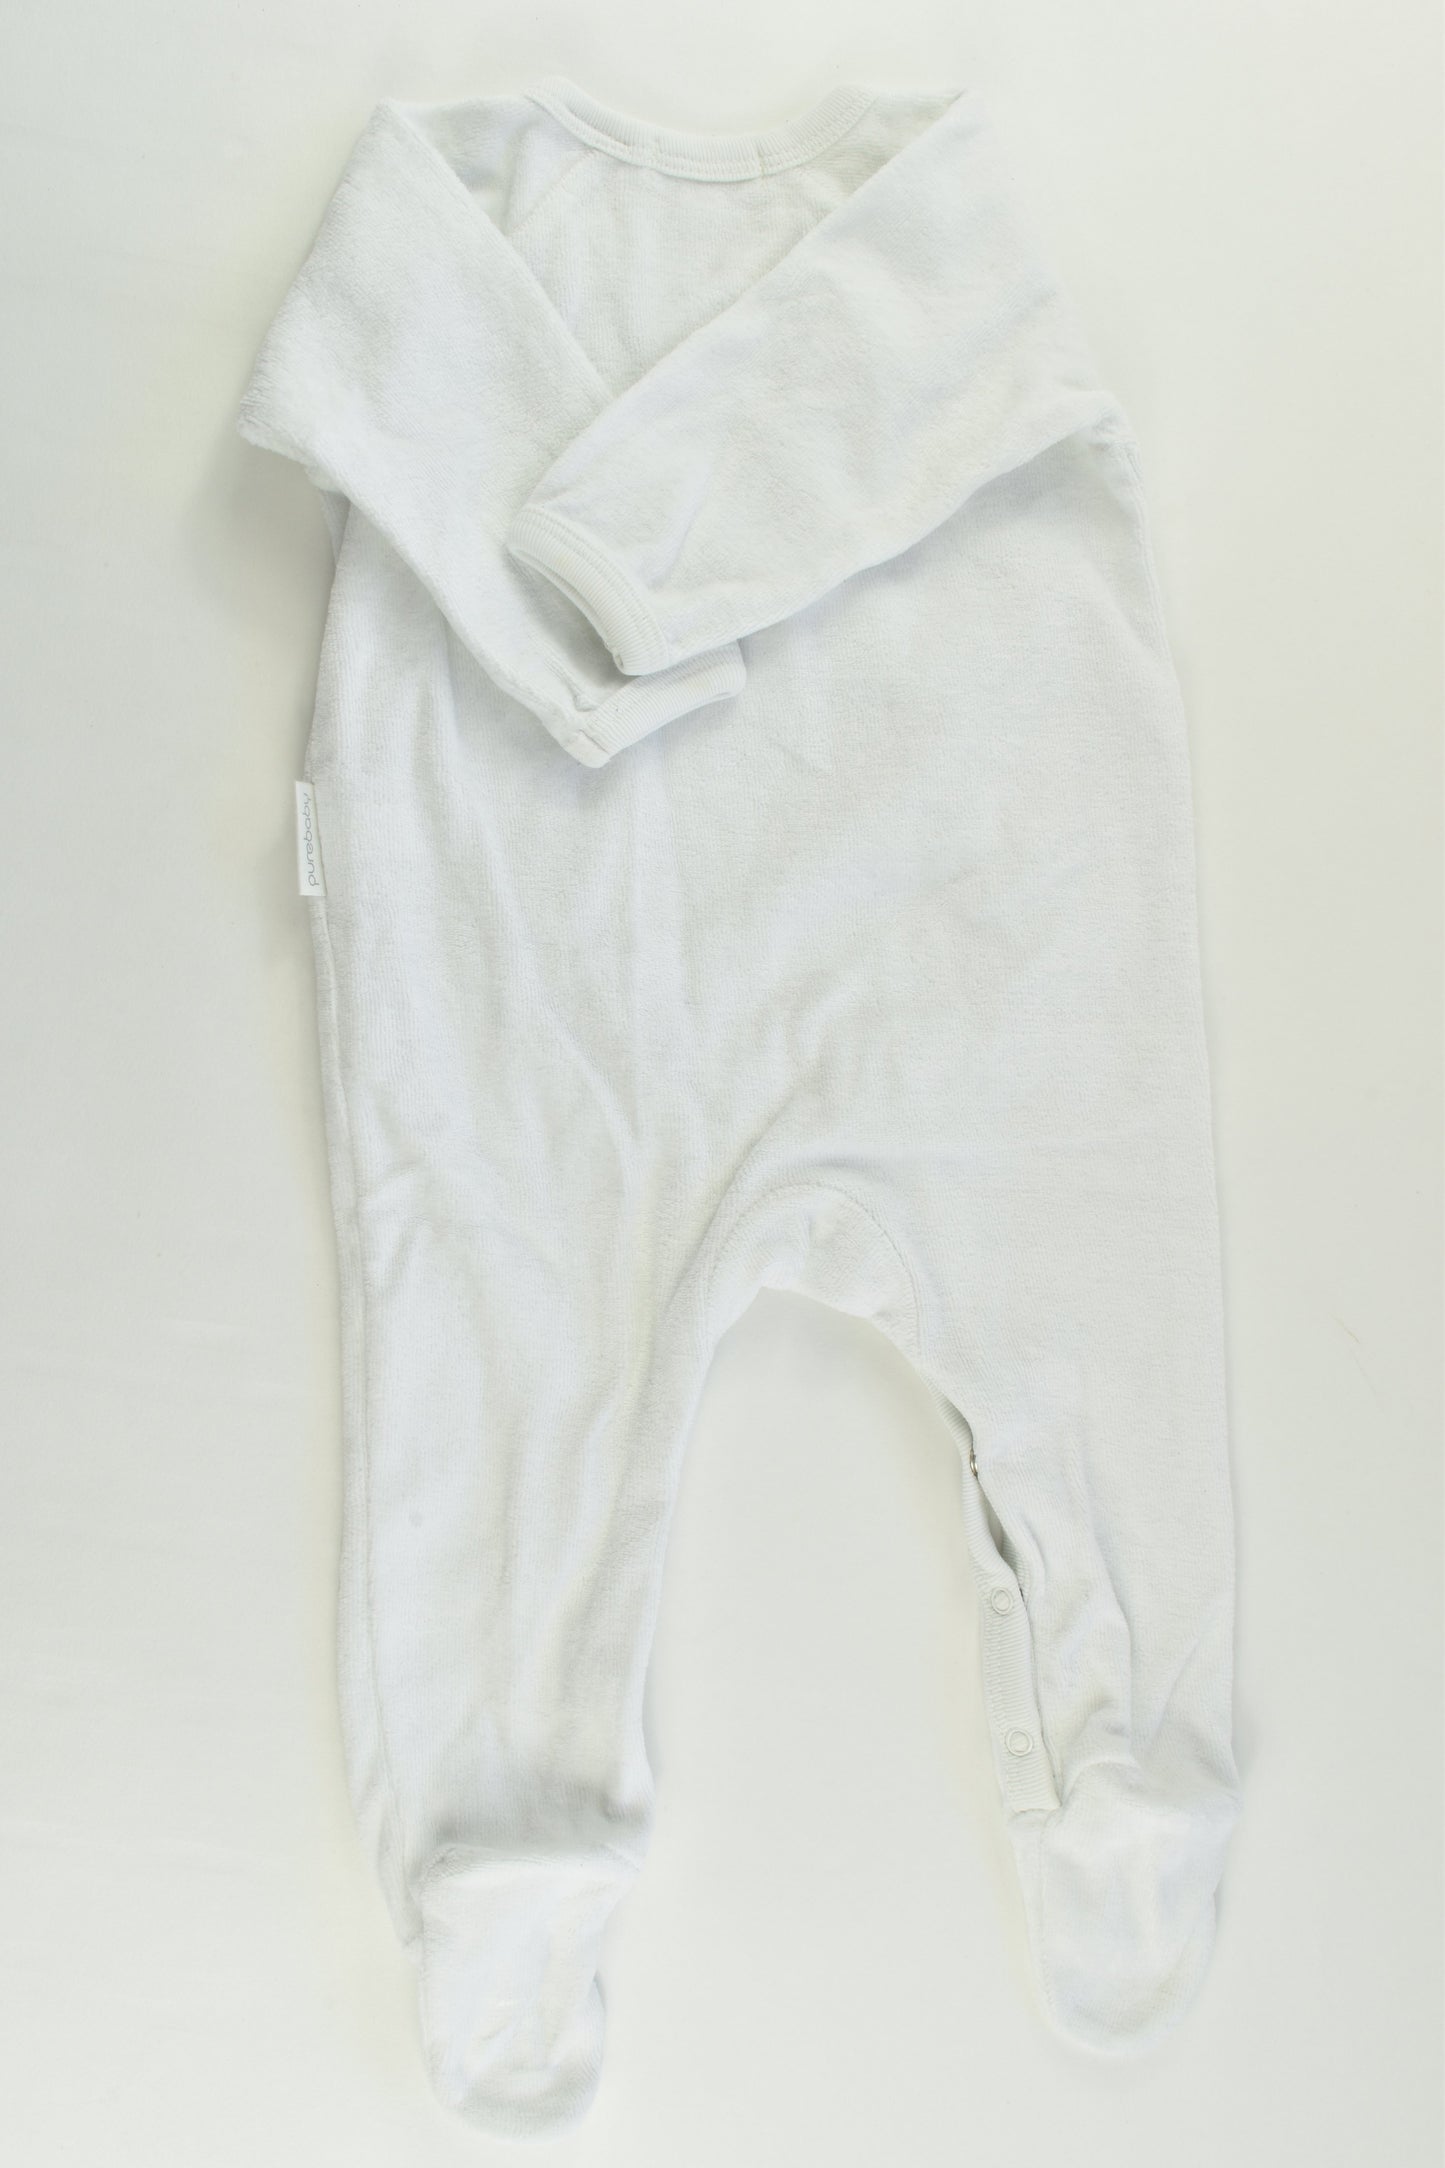 Purebaby Size 00 (3-6 months) Footed Elephant Velour Romper